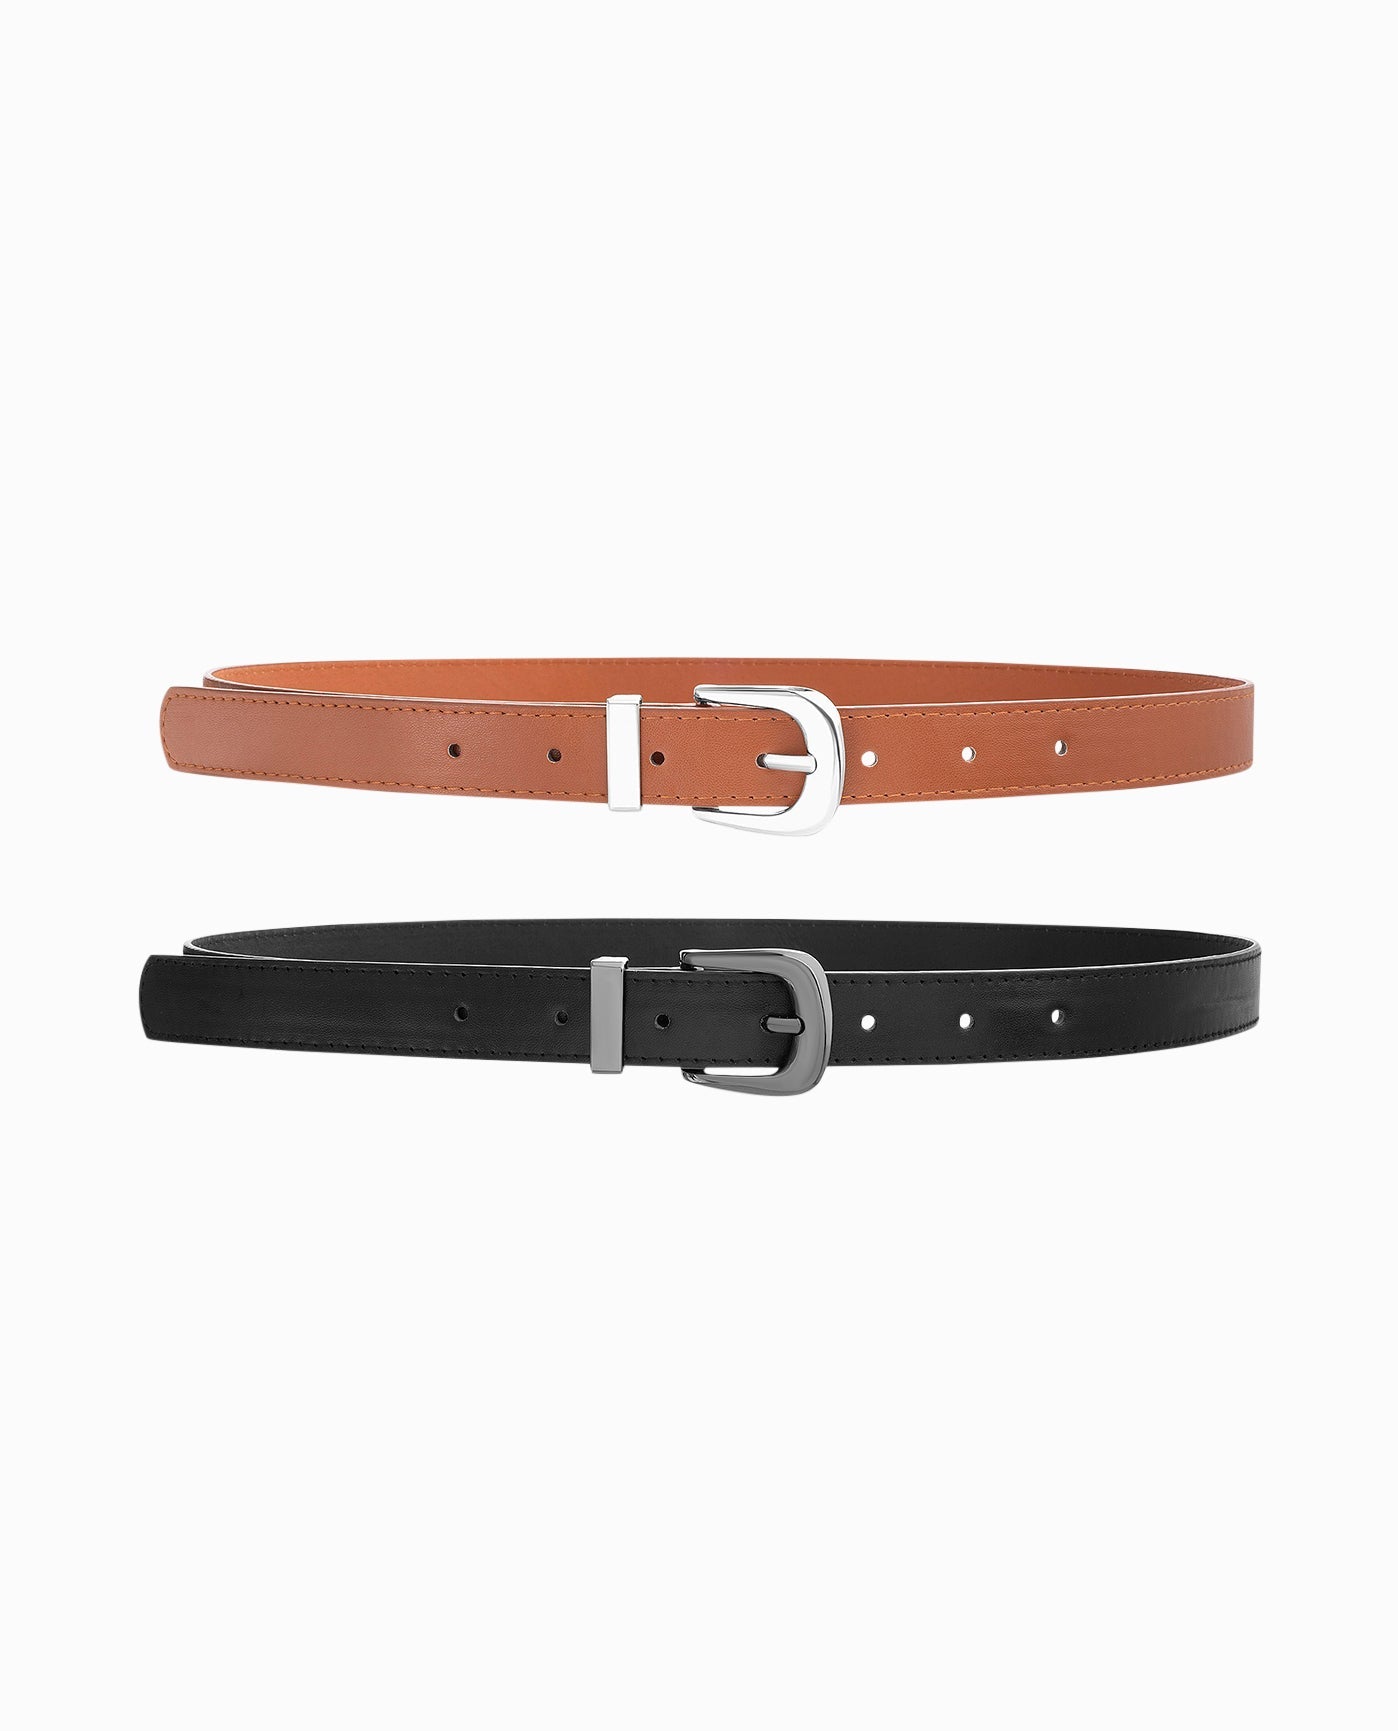 METAL BUCKLE THIN BELT TWO-PIECE SET | Black and Brown